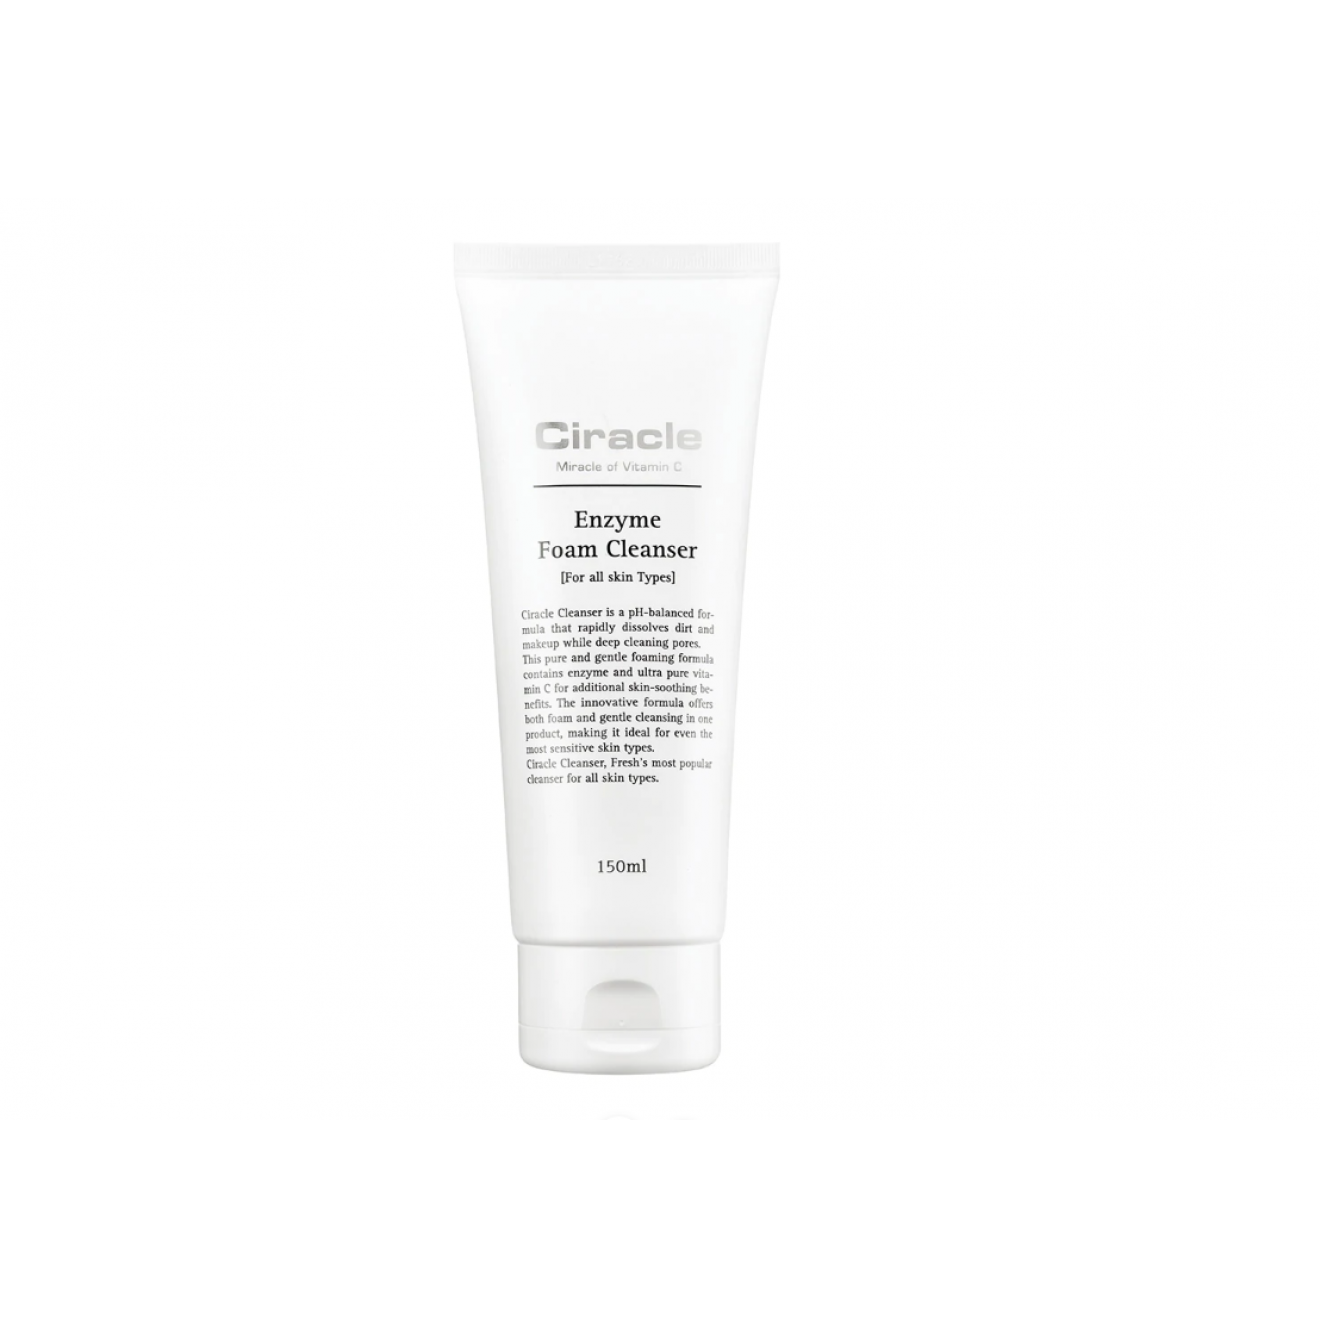 Ciracle Enzyme Foam Cleanser, 150 ml